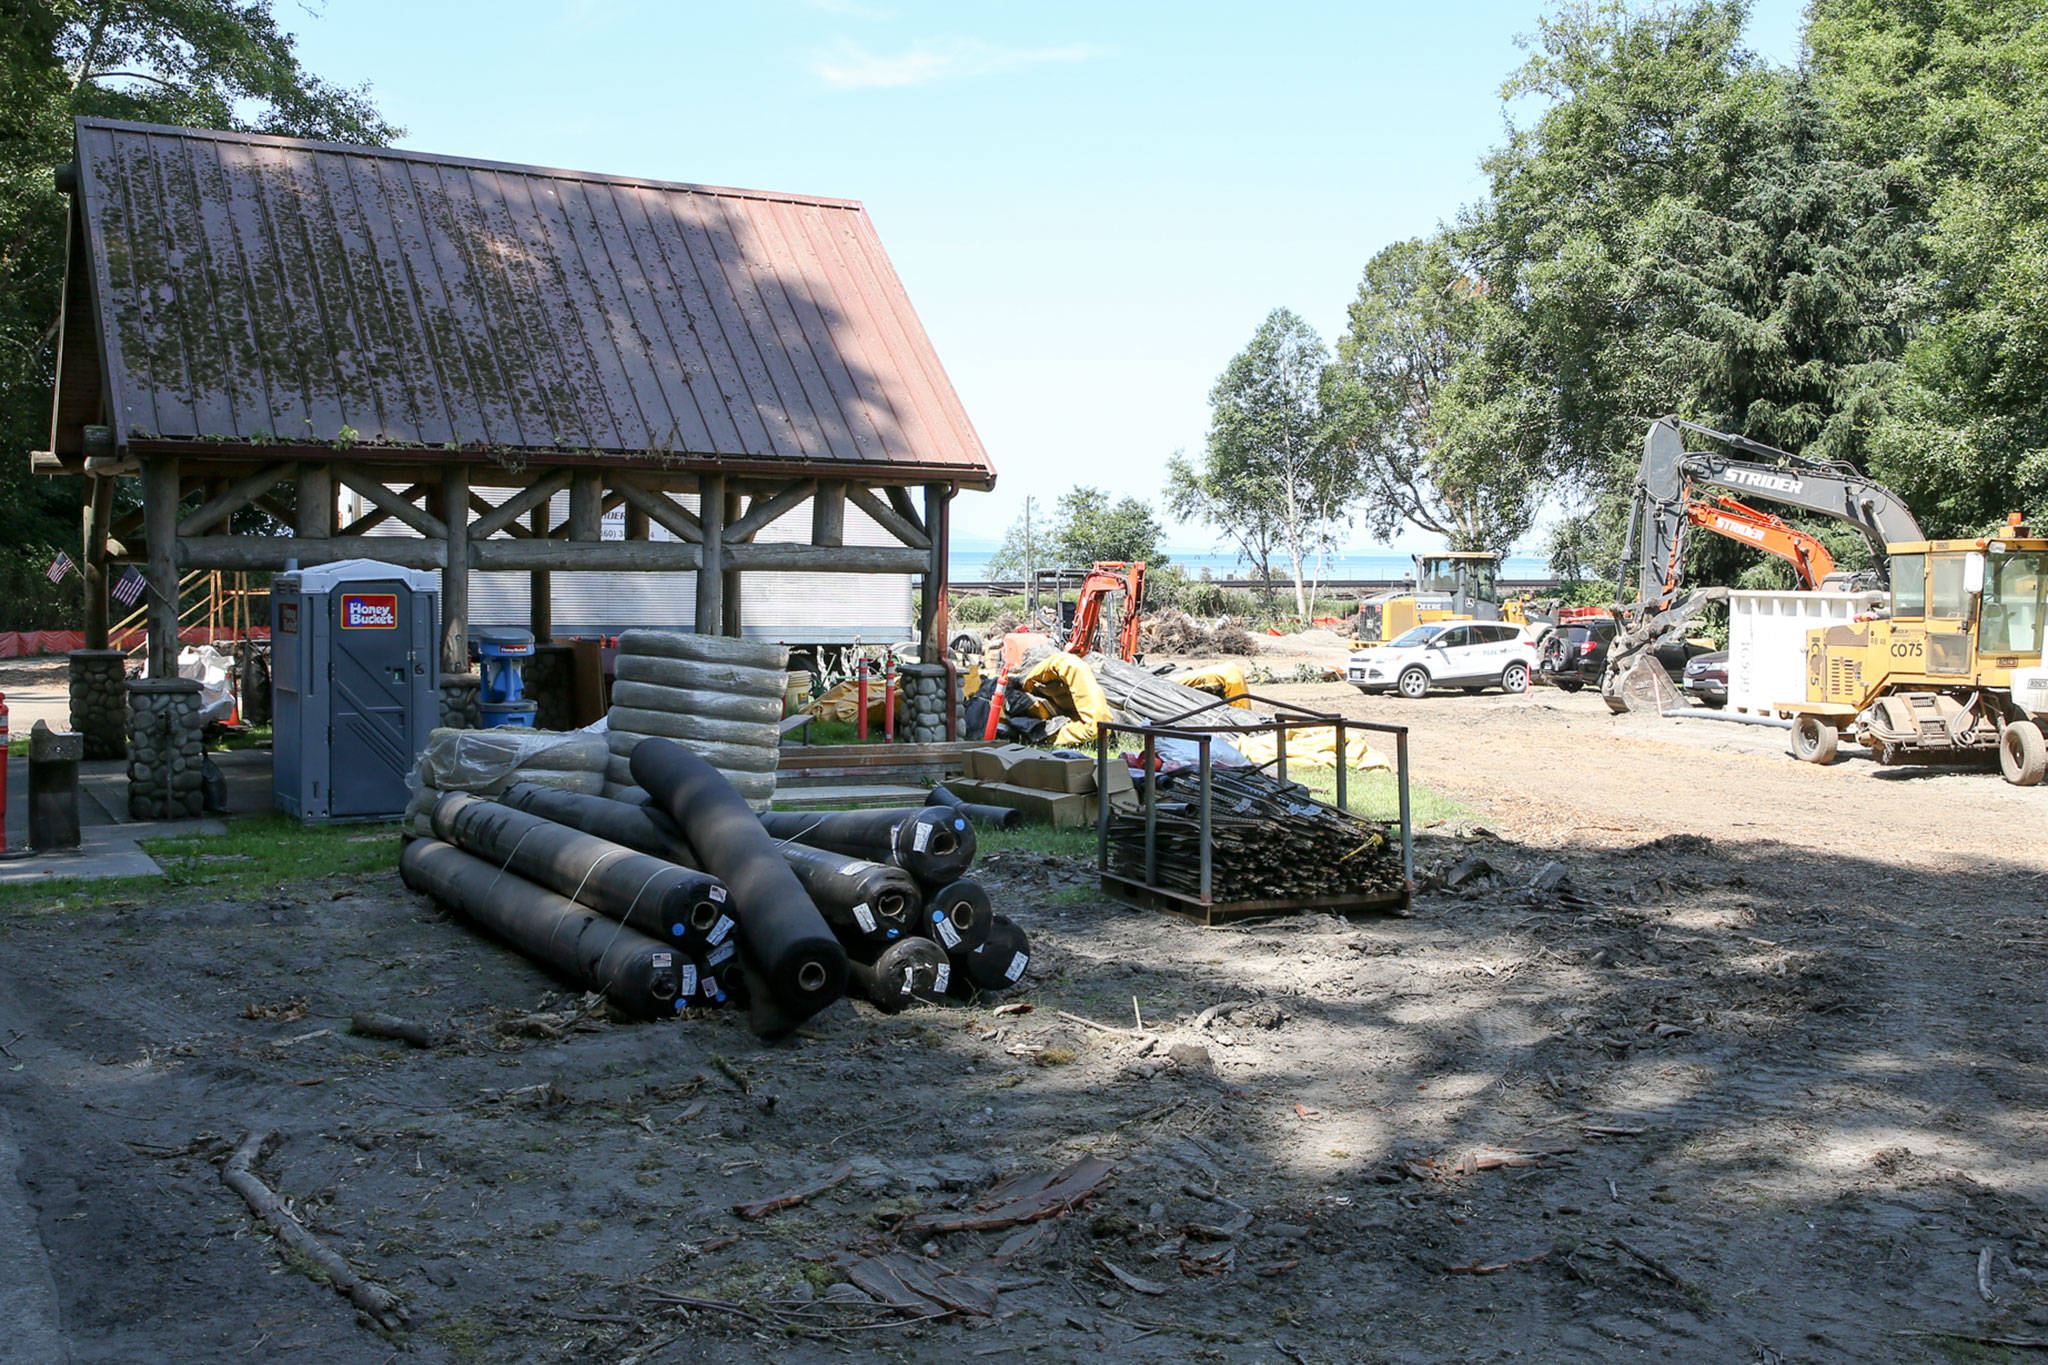 Work has begun of the Estuary Restoration Project Friday afternoon at Meadowdale Beach Park on July 9, 2021. (Kevin Clark / The Herald)
Work has begun on a estuary restoration project at Meadowdale Beach Park in Edmonds. (Kevin Clark / The Herald)